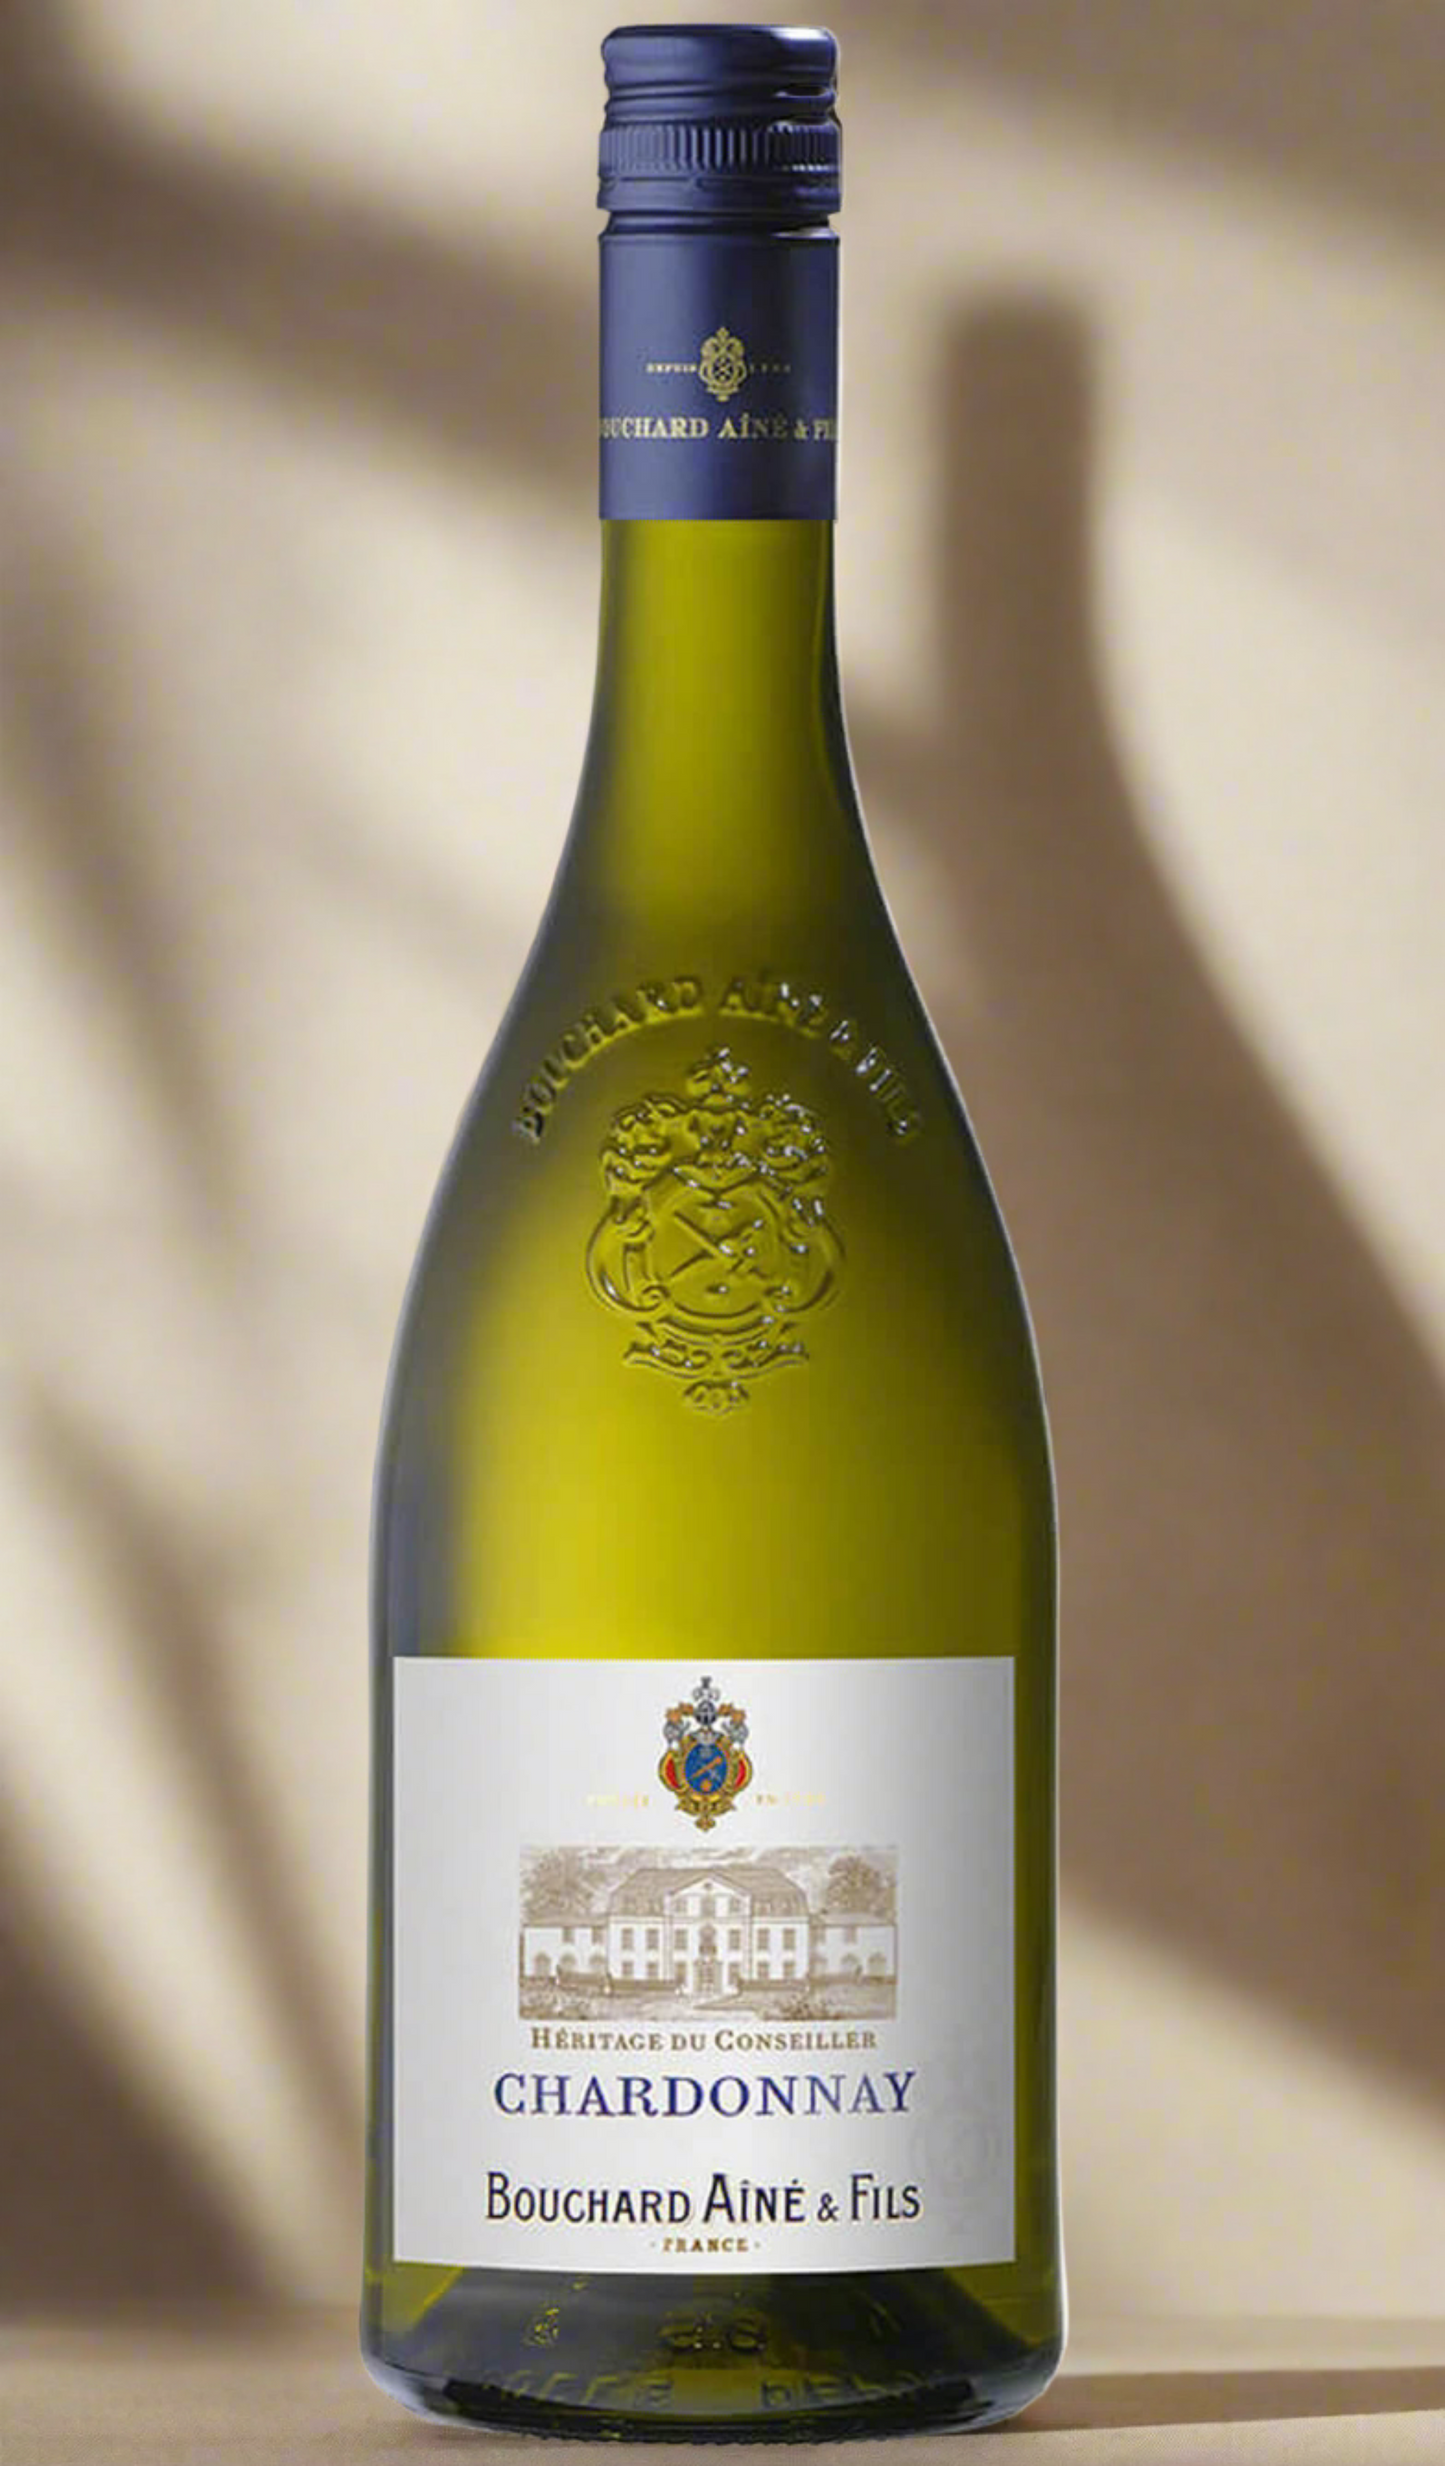 Find out more or buy Bouchard Aine & Fils 'Heritage du Conseiller' Chardonnay 2023 online at Wine Sellers Direct - Australia’s independent liquor specialists.